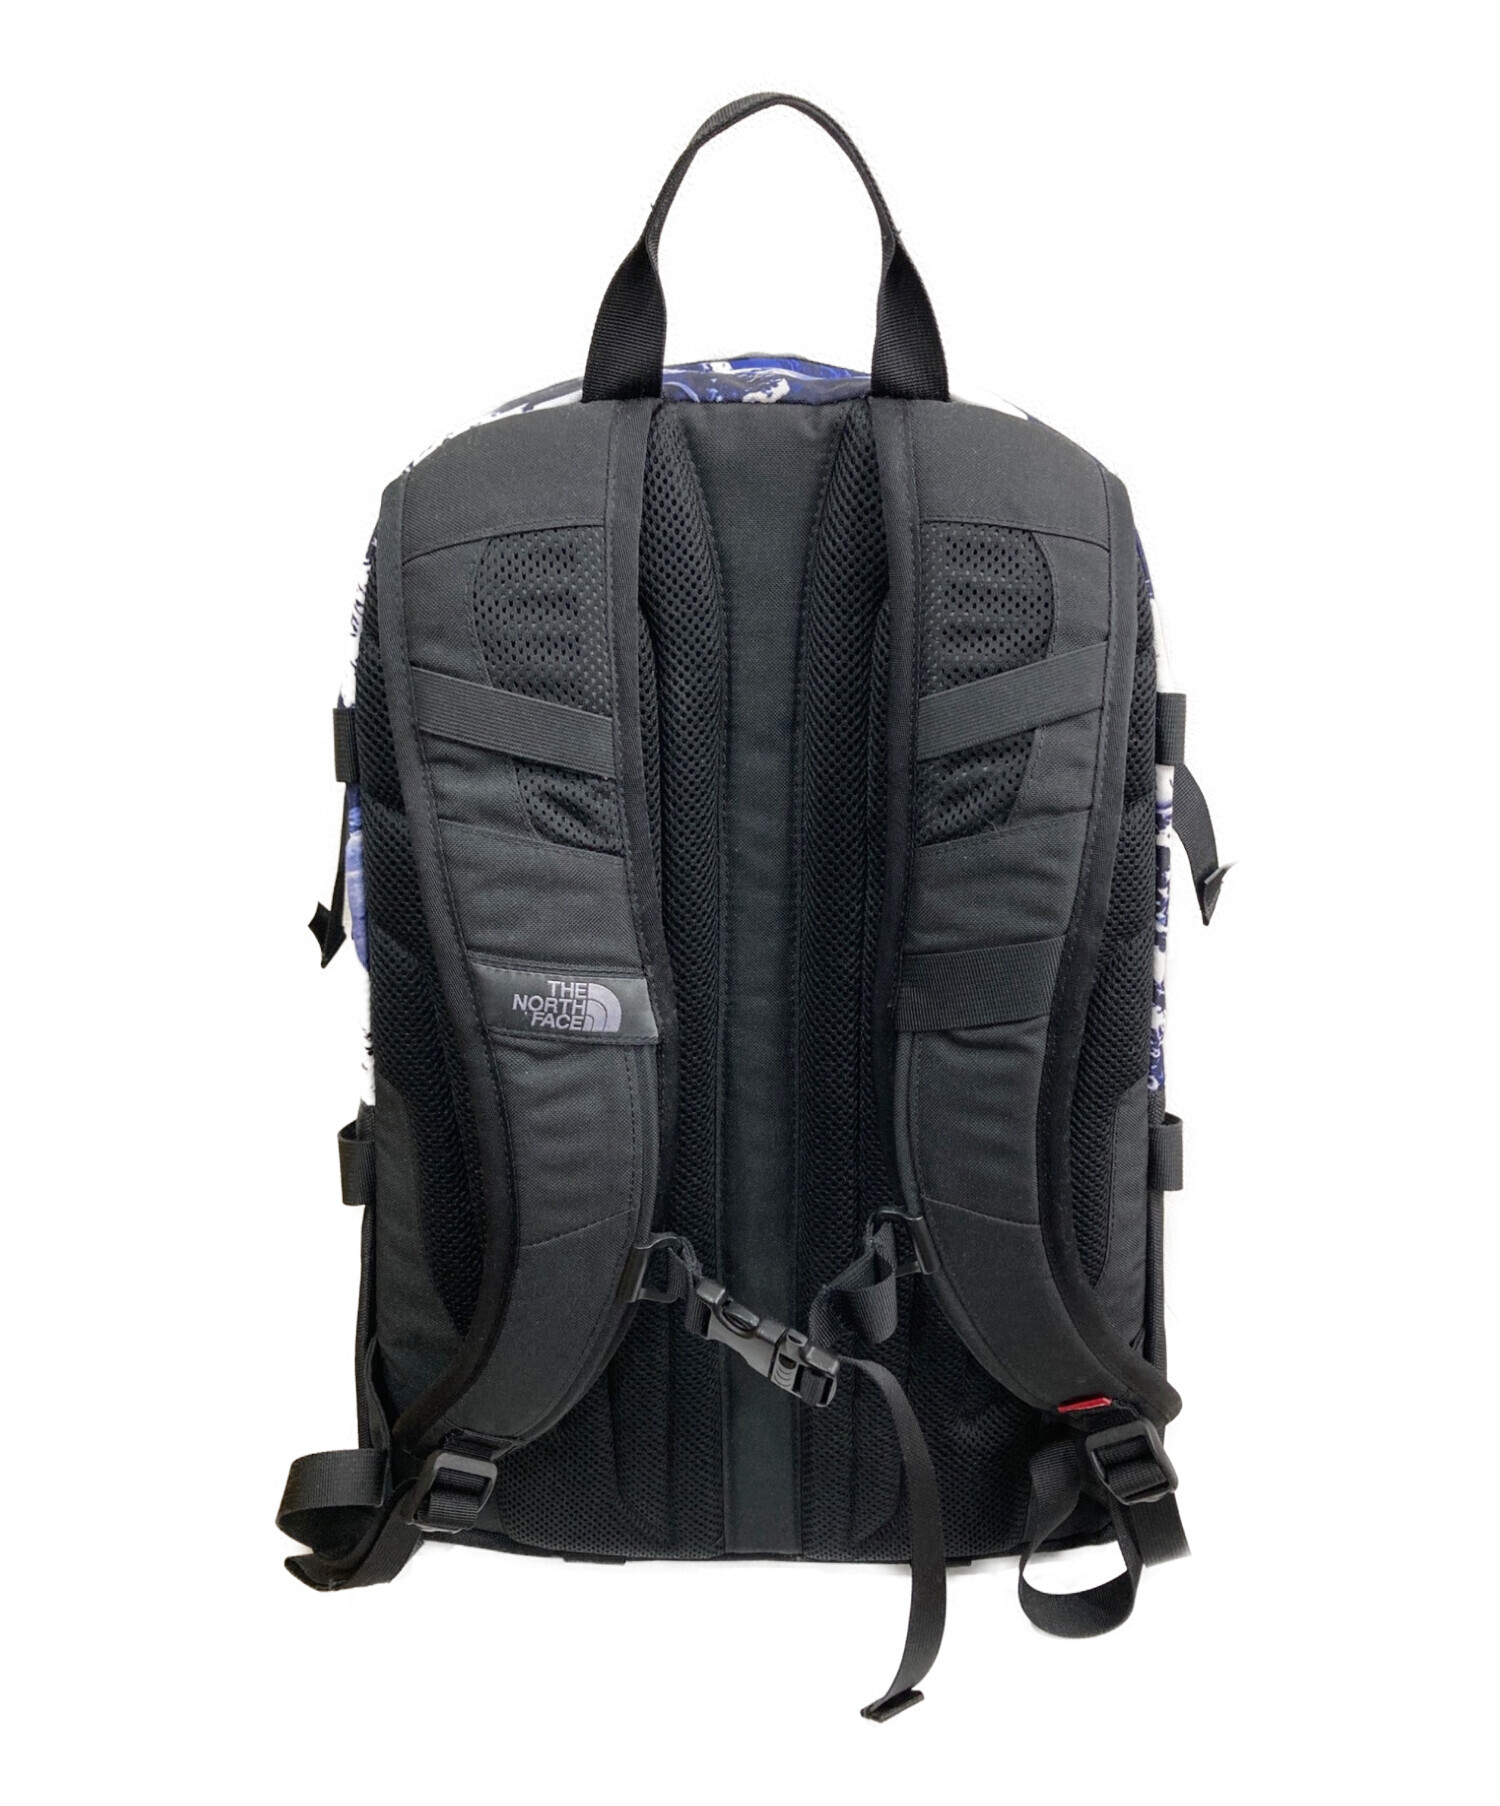 supreme thenorthface expedition backpack